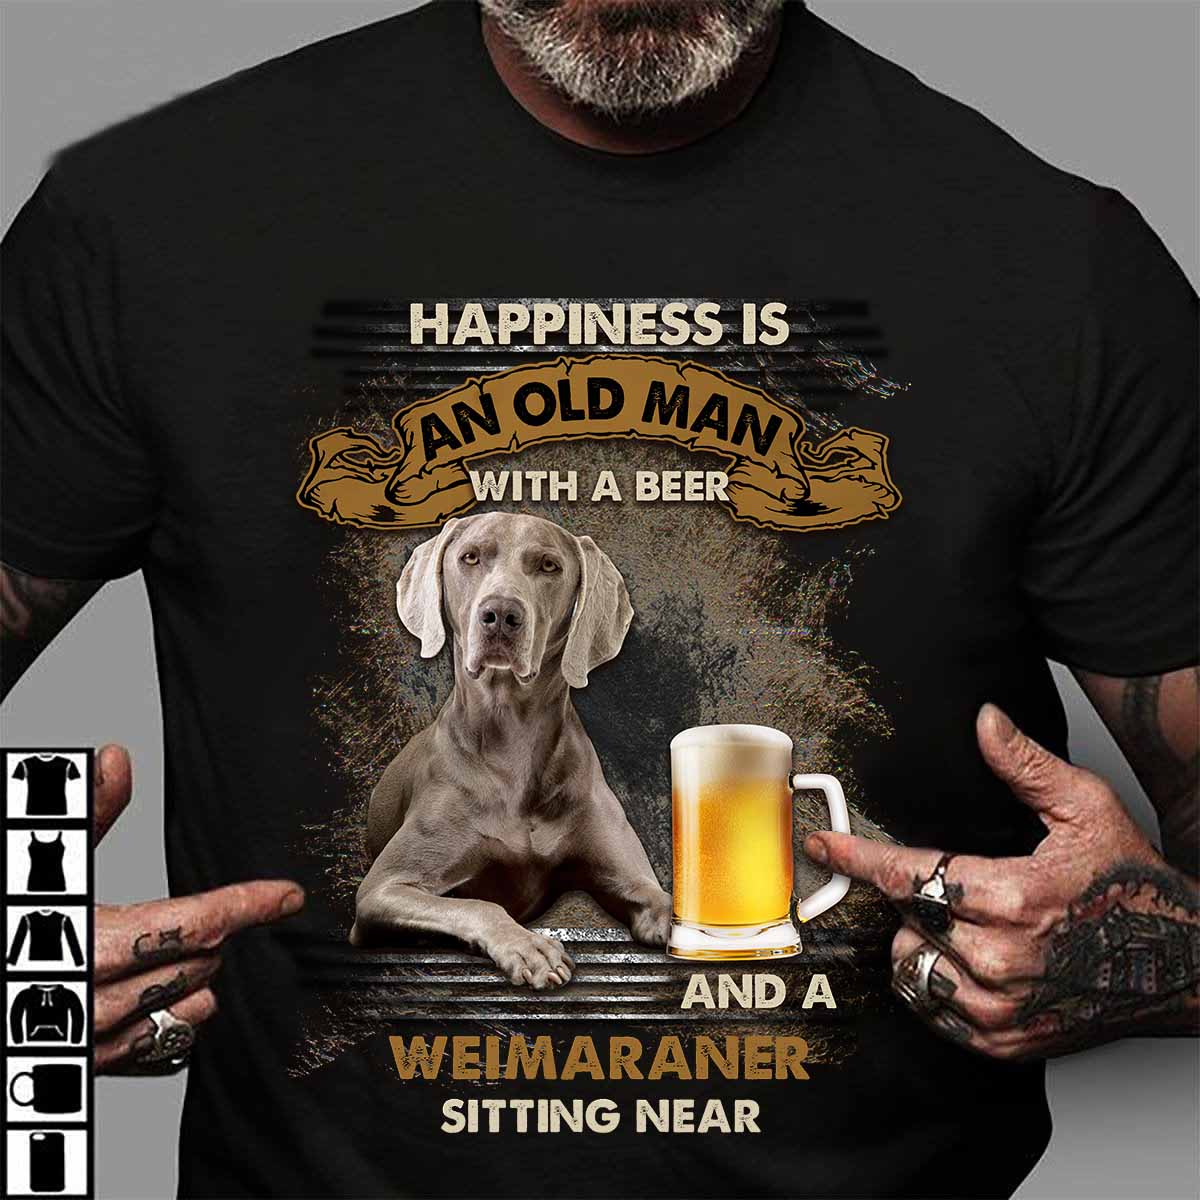 Happiness is an old man with a beer and a Weimaraner sitting near - Beer lover